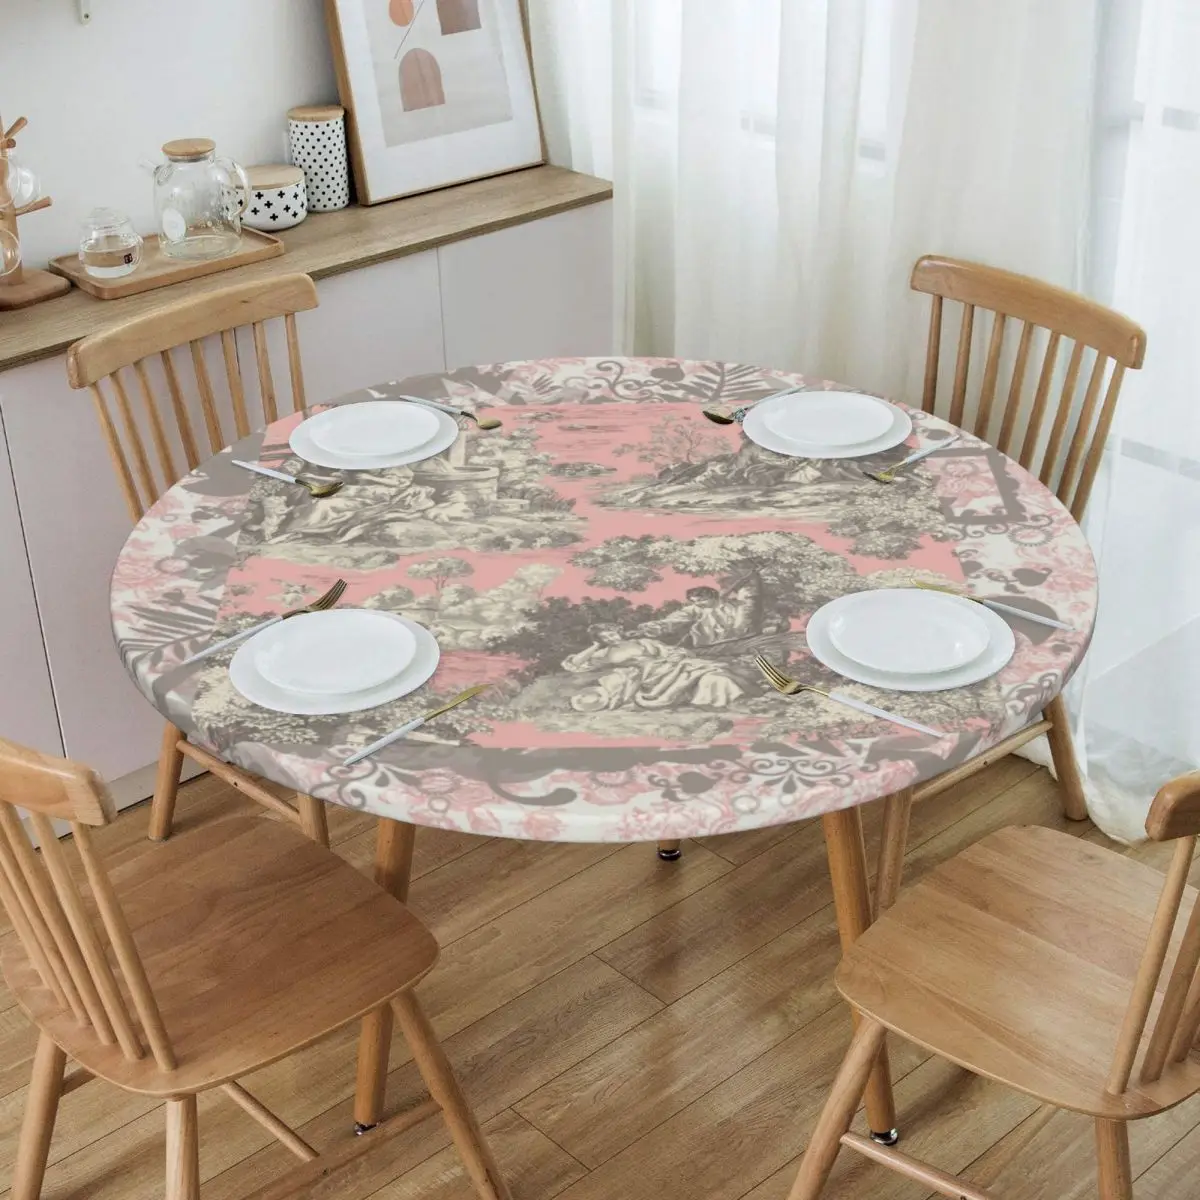 

Toile De Jouy Tablecloth Round Elastic Waterproof French Motif Flora Table Cover Cloth for Dining Room